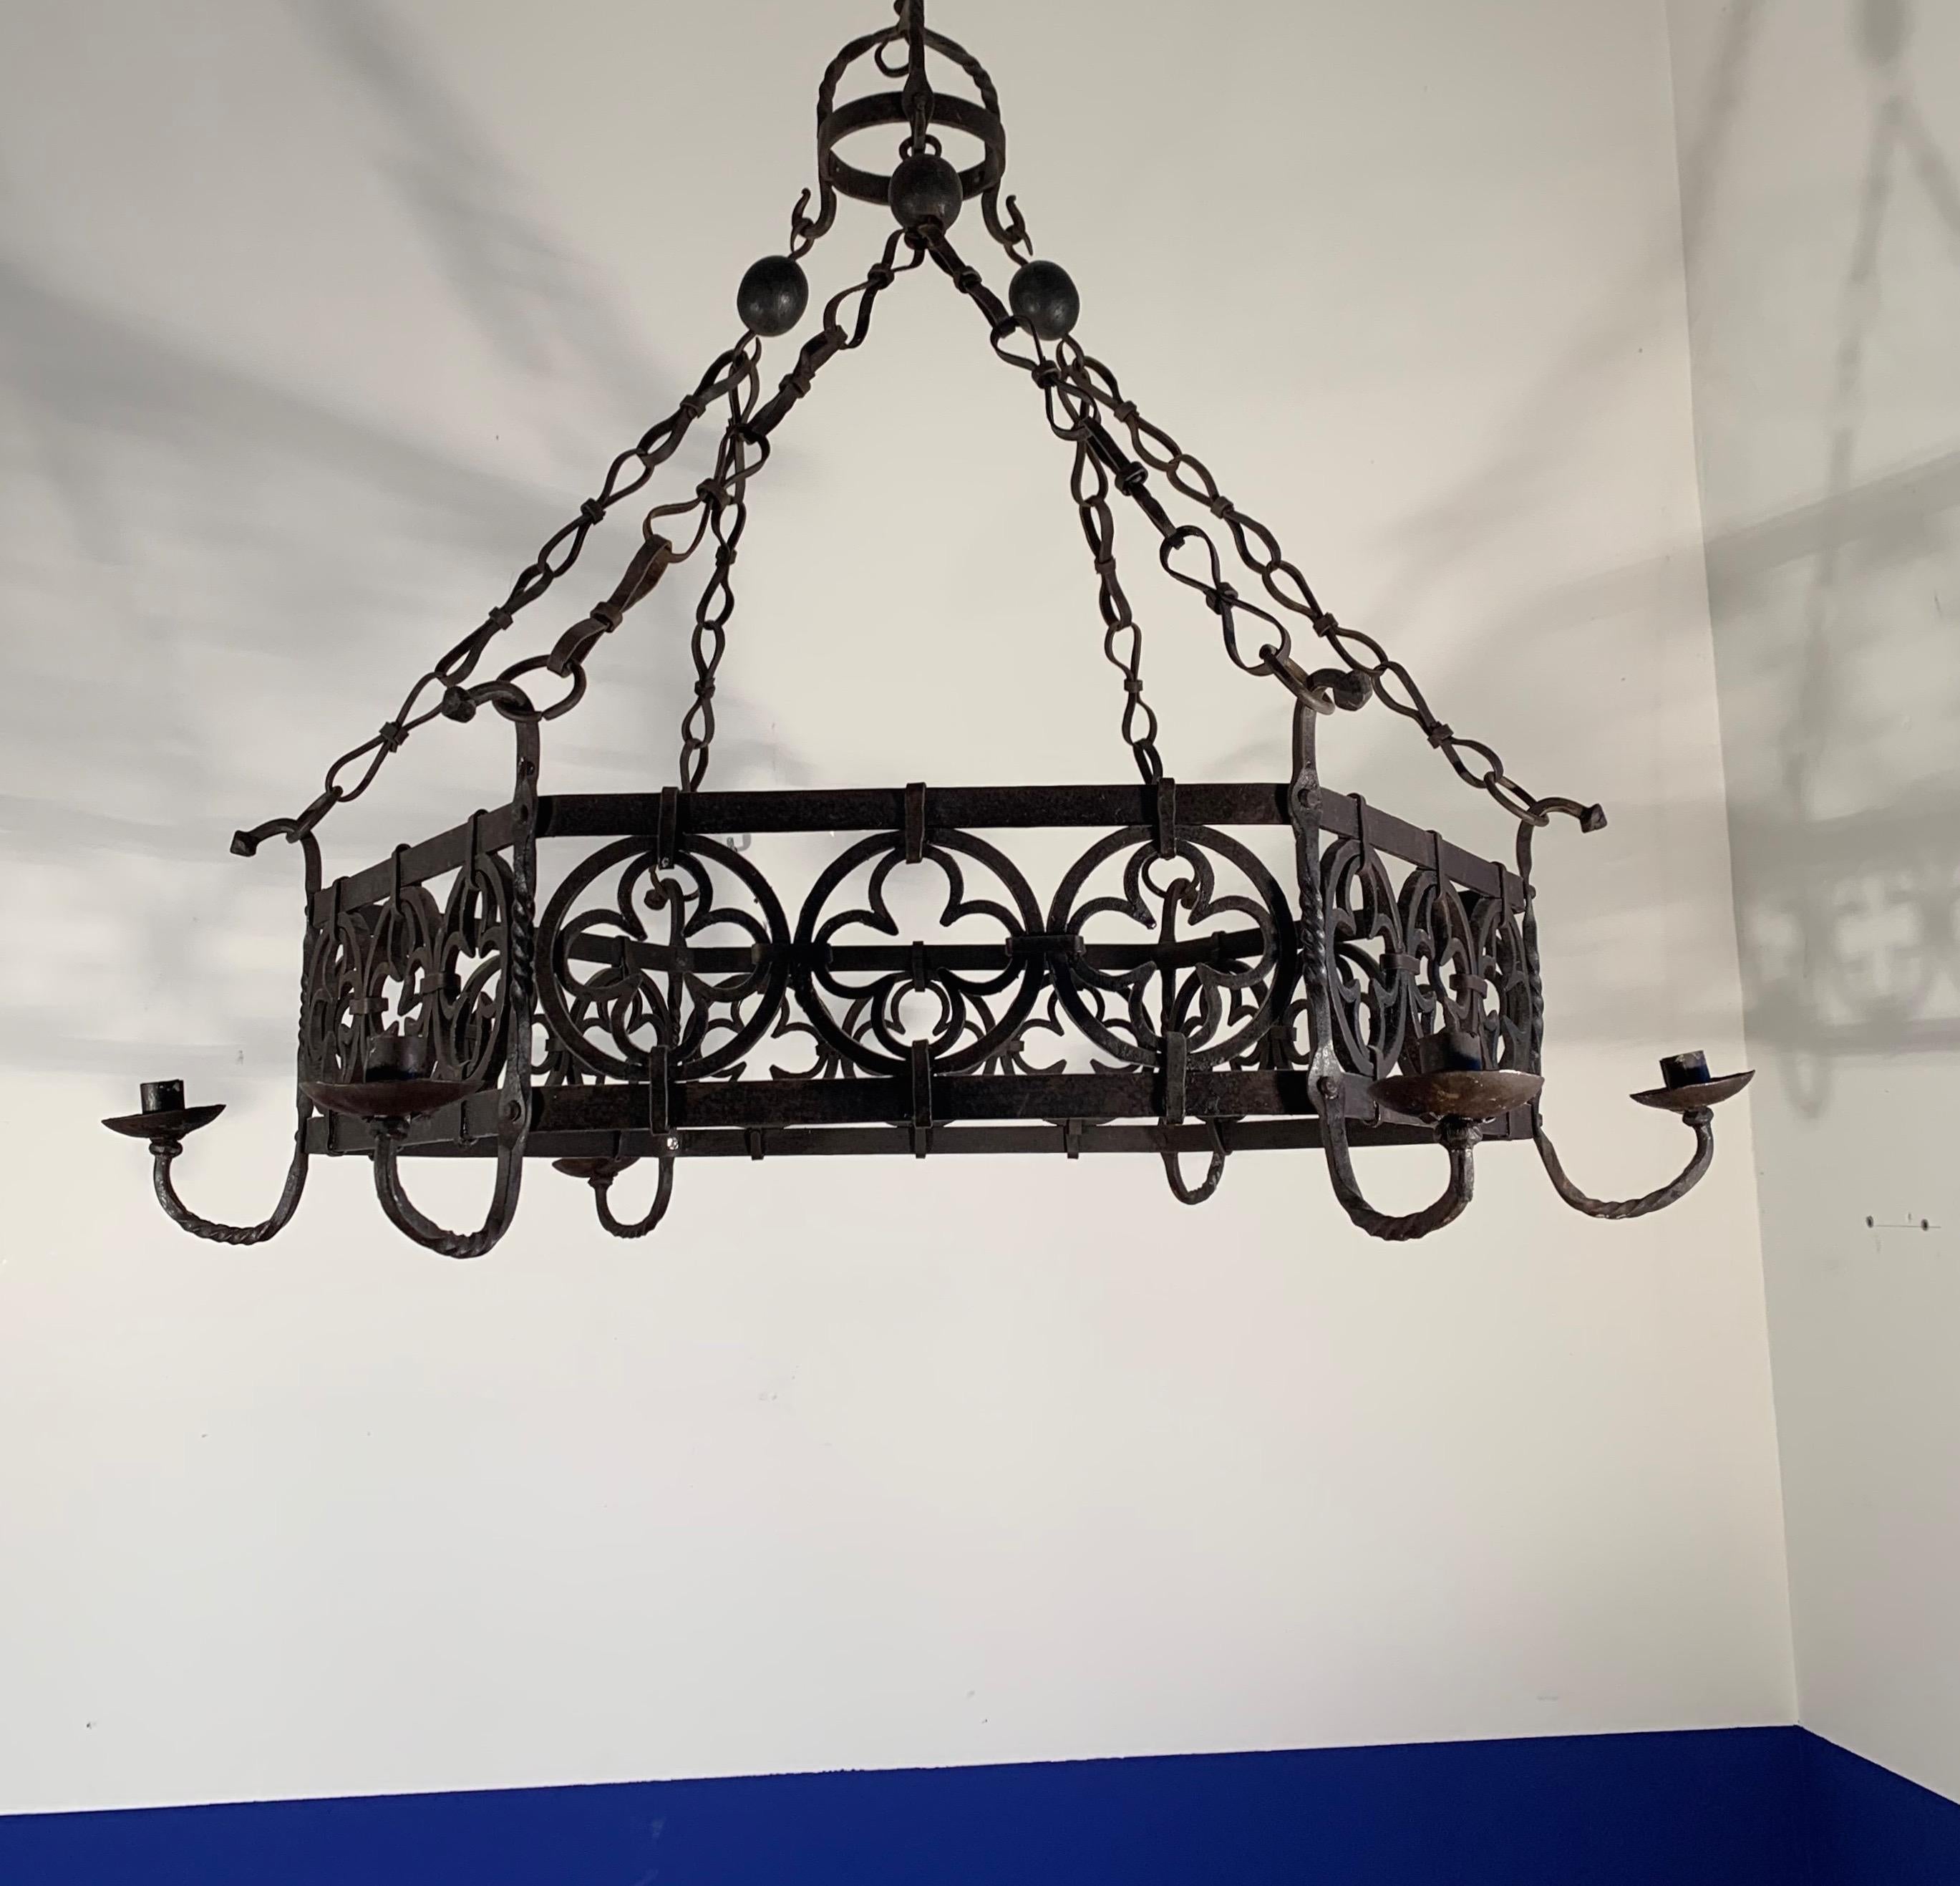 20th Century Large Gothic Revival Wrought Iron Chandelier for Dining Room / Restaurant Etc For Sale